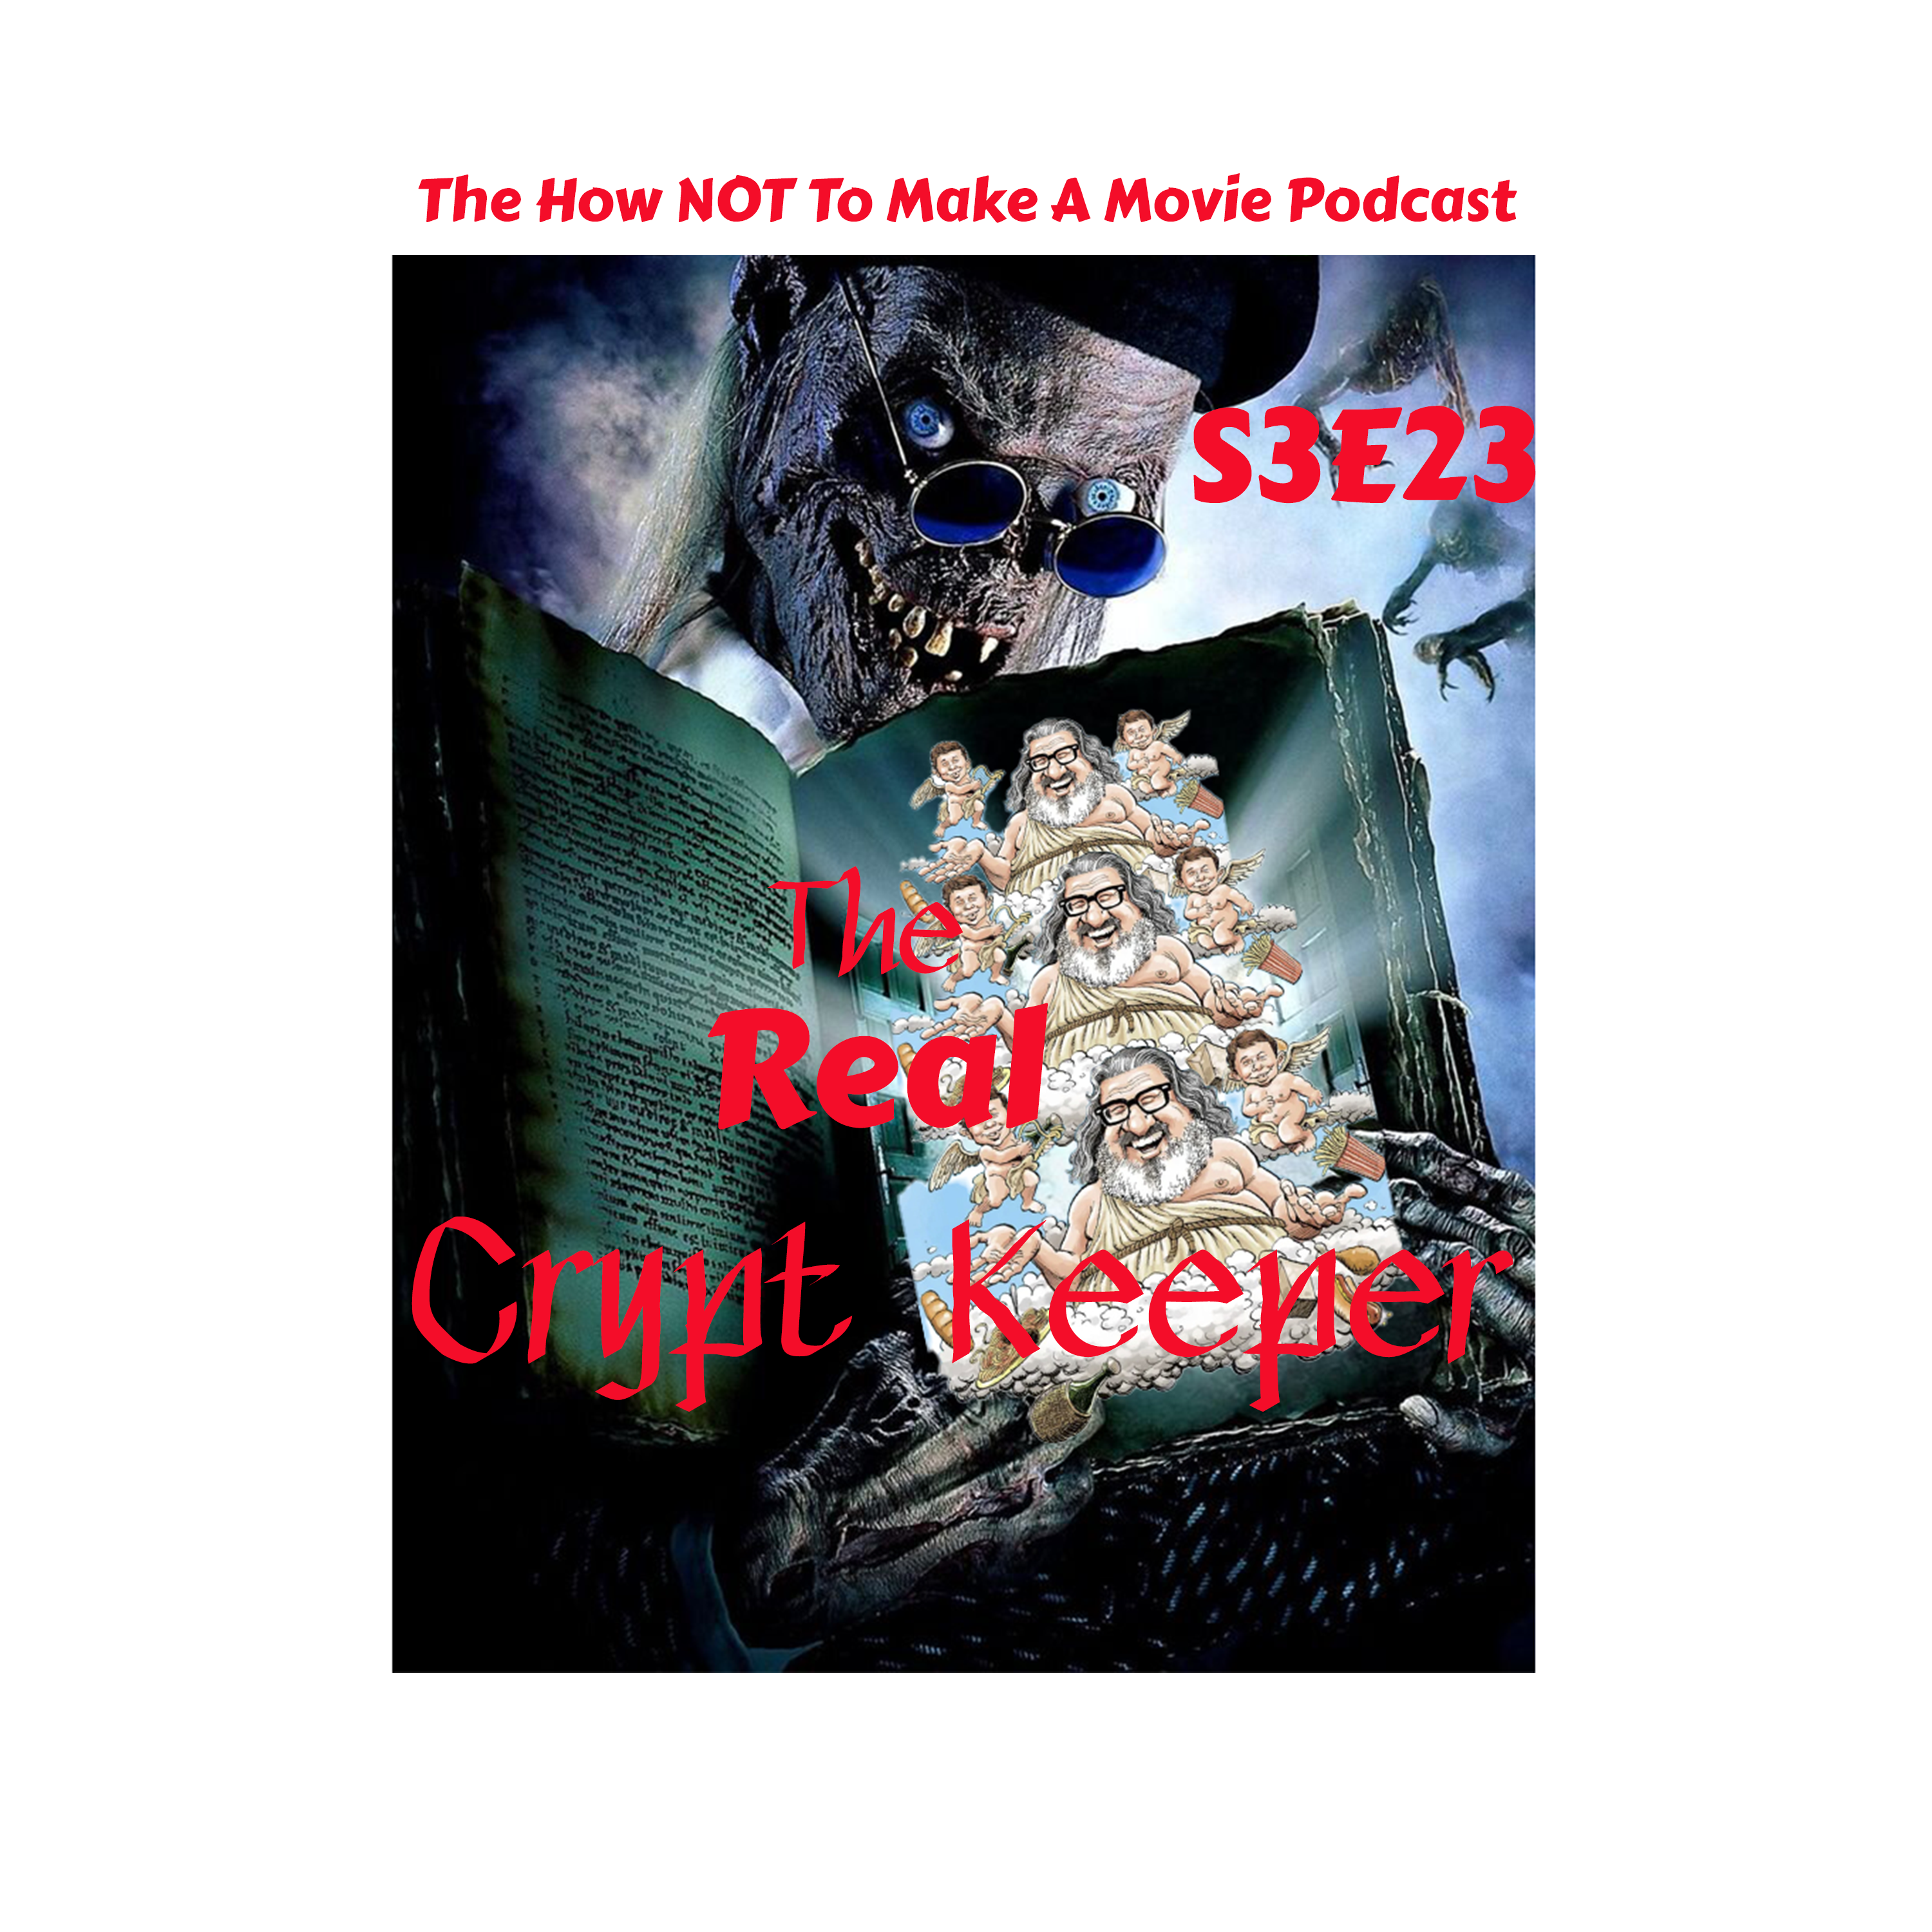 S3E23: The REAL Crypt Keeper